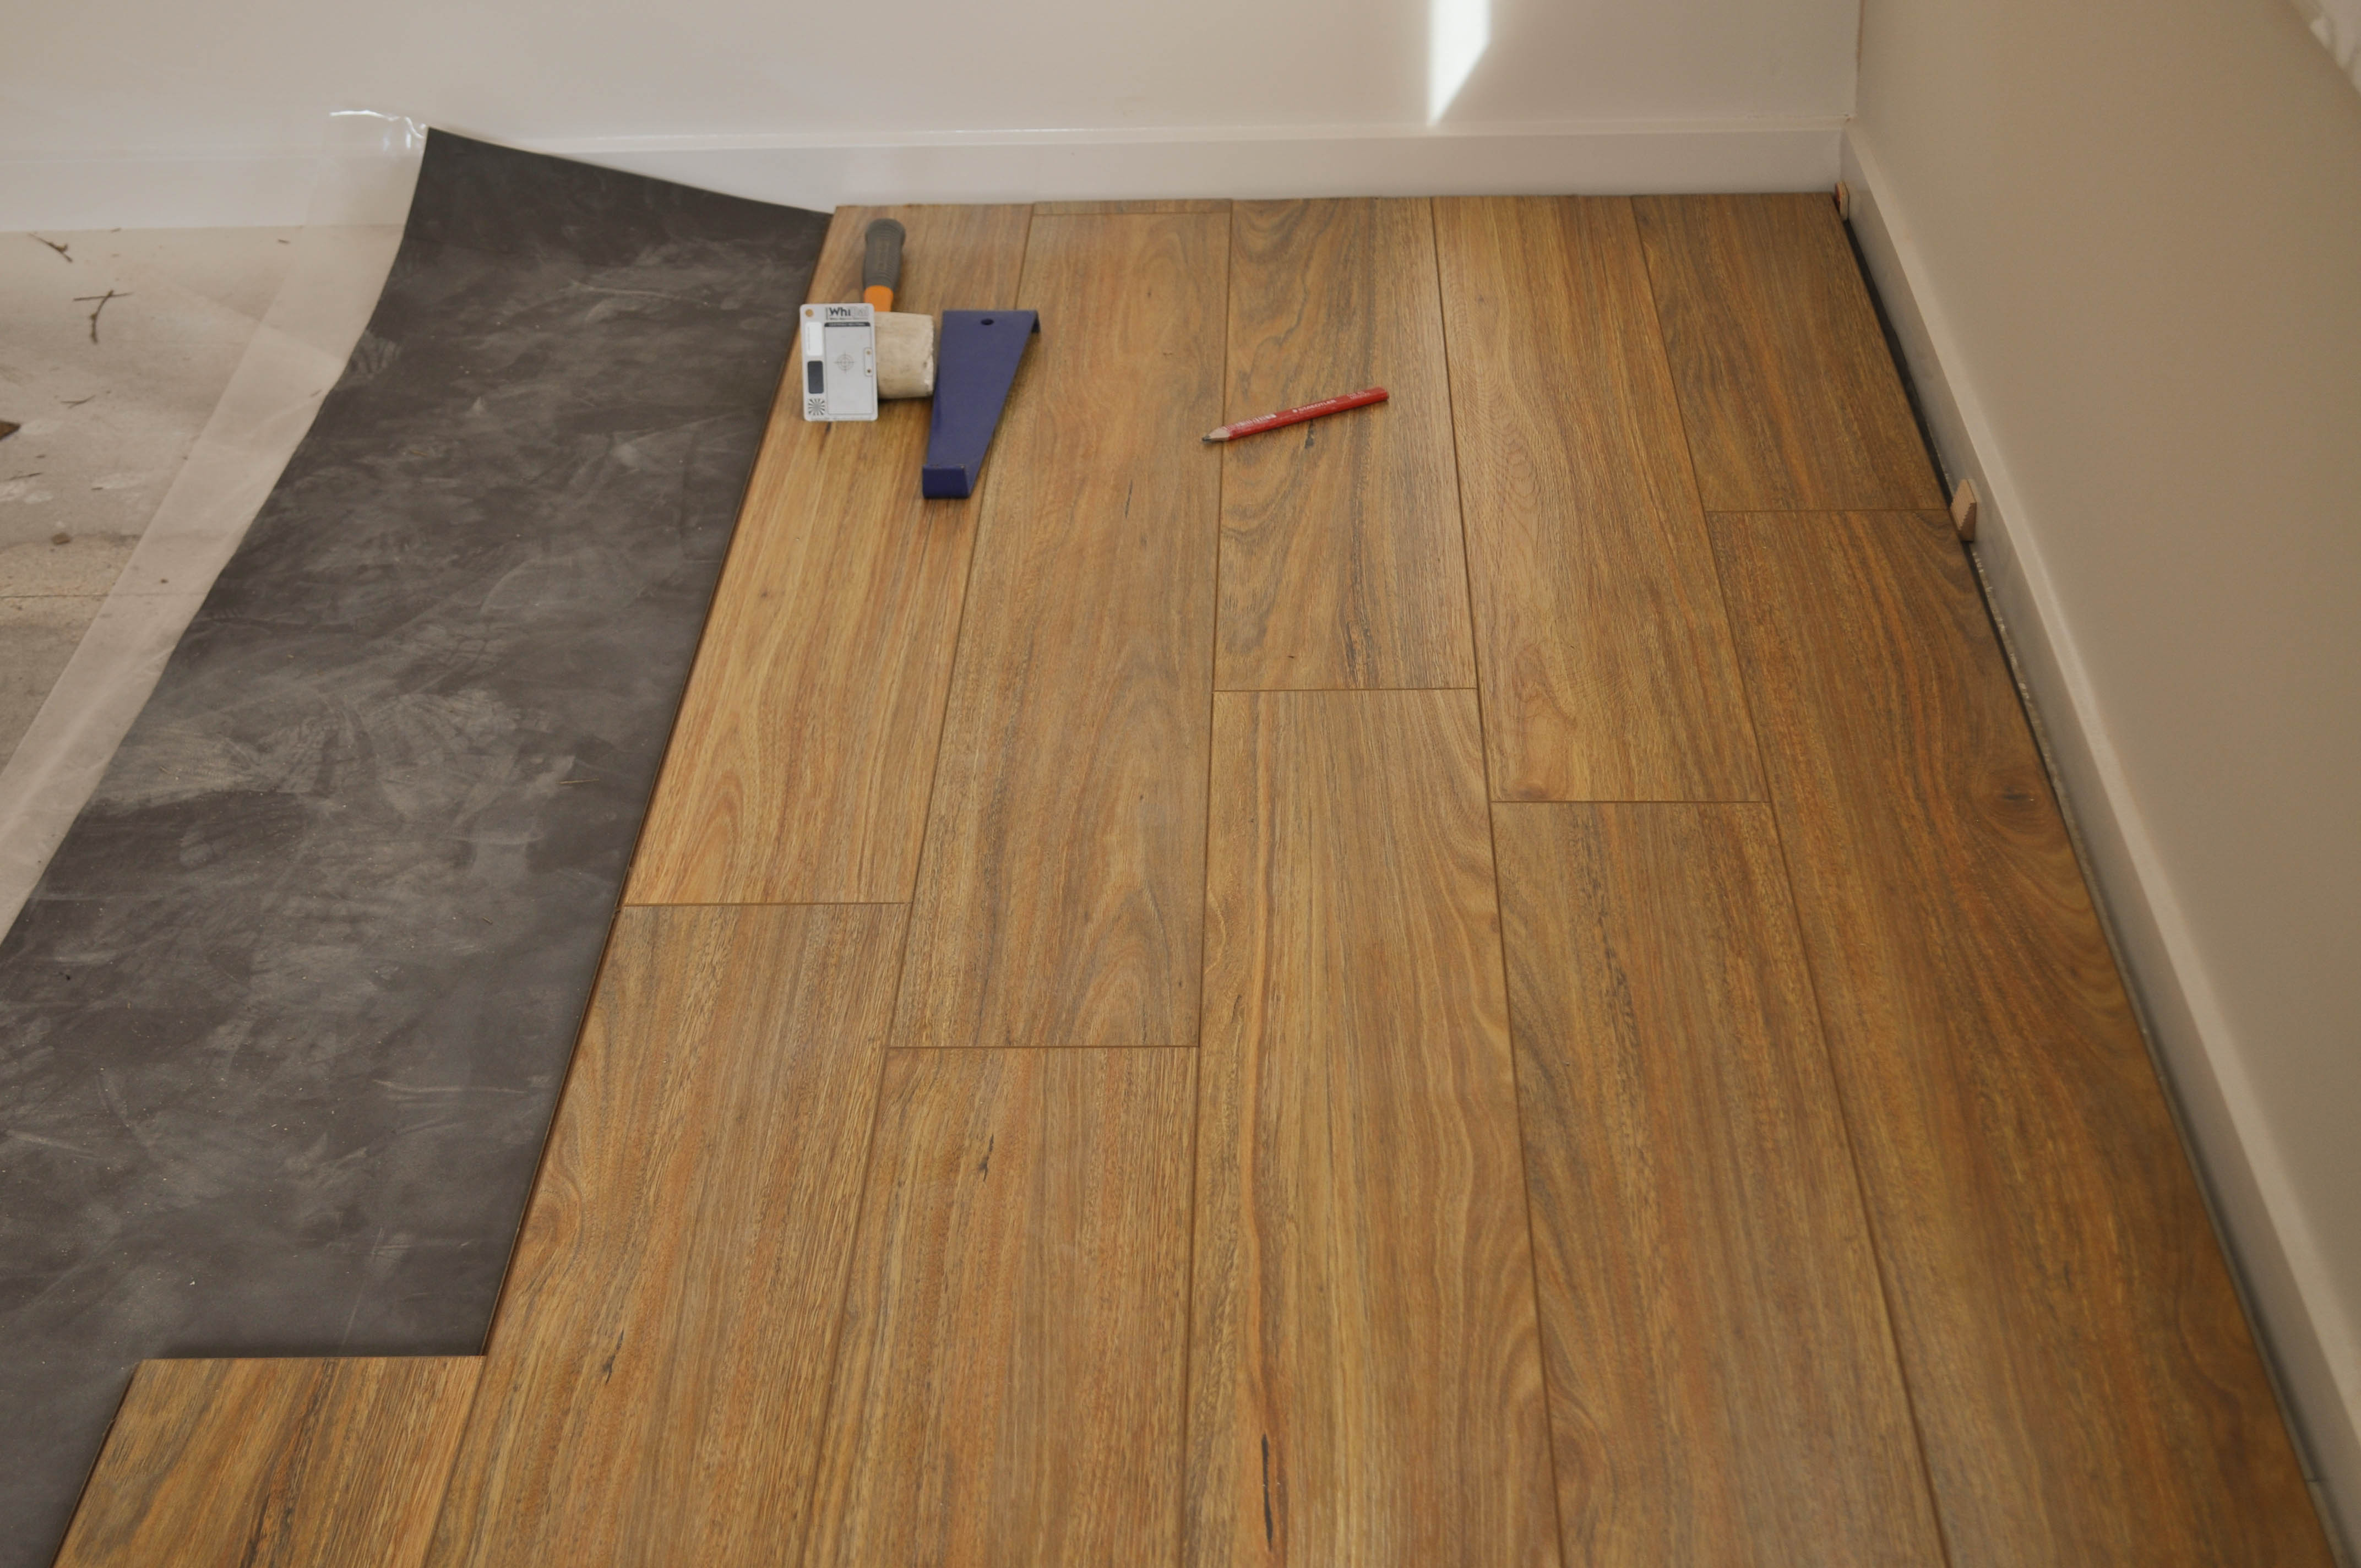 this picture shows a room in which 5 rows by the entire length of the room of 12mm thick laminate floorboards, in this
 case 12mm thick Spotted Gum, have been laid over black accoustic underlay. The particle board sub-floor has been prepared to receive the underlay and the underlay rolled out 
 to receive the floor boards. The row of floor boards next to the wall has 10mm thick wedges placed there so that the floorboards are kept 10 mm from the wall thus creating 
 a permanent expansion gap. The second row is installed by interlocking it into the first row and the third row into the second and the fouth into the third and the fifth 
 into the fourth. When the last board in the row that reaches the wall, reaches the wall, it is marked to the size to fit between the wall and the second last board and cut on that 
 mark. The excess balance of the board is then taken to the other side of the room to commence the next row. The tapping tool and the mallet is sitting on the flooring. This is 
 the process of installing/laying a floating floor. The room is in a home in the suburb of Point Cook, Werribee Vic 3030 and the boards were supplied and installed by
 Concord Floors. This is information as to how to install laminate flooring for the do it yourself floor board laminate flooring installer.